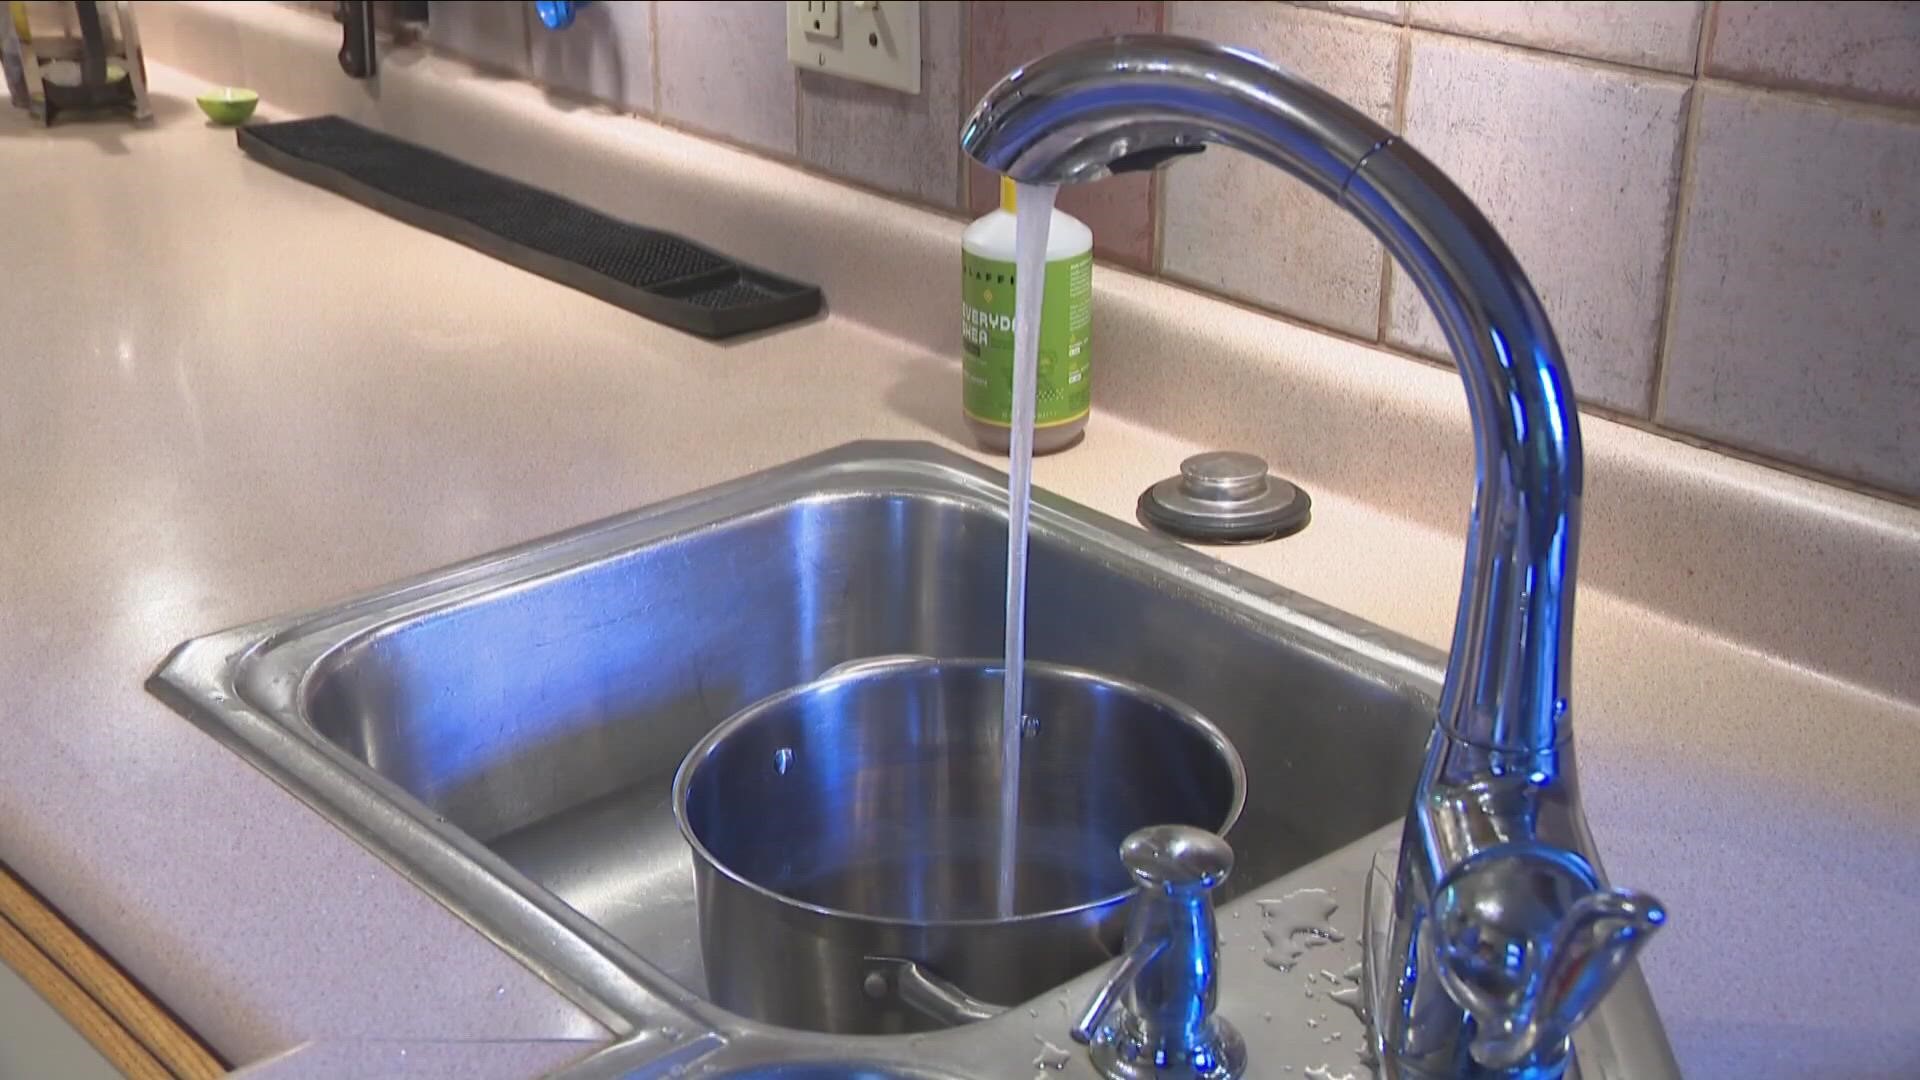 The city of Buffalo being sued over the lack of fluoride in the drinking water